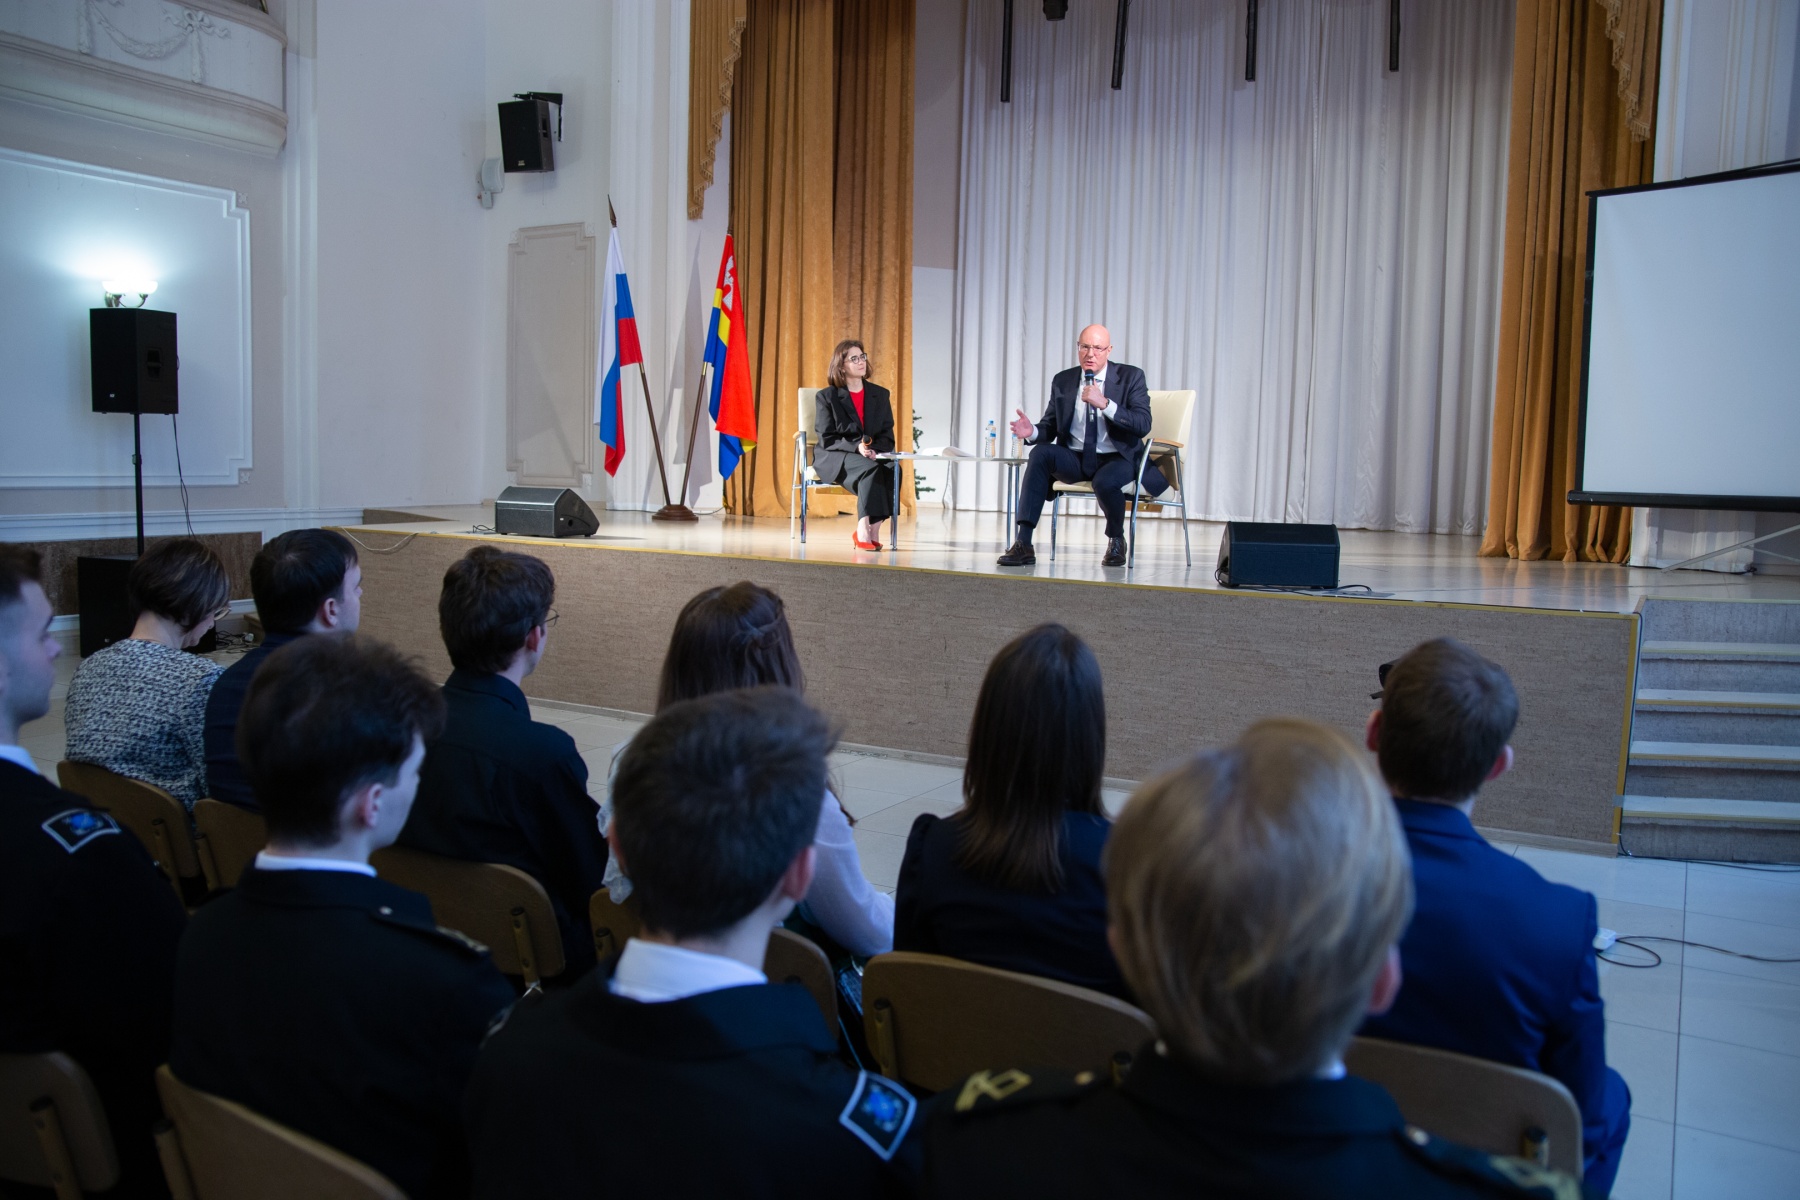 Deputy Chairman of the Government of the Russian Federation meets students at KSTU